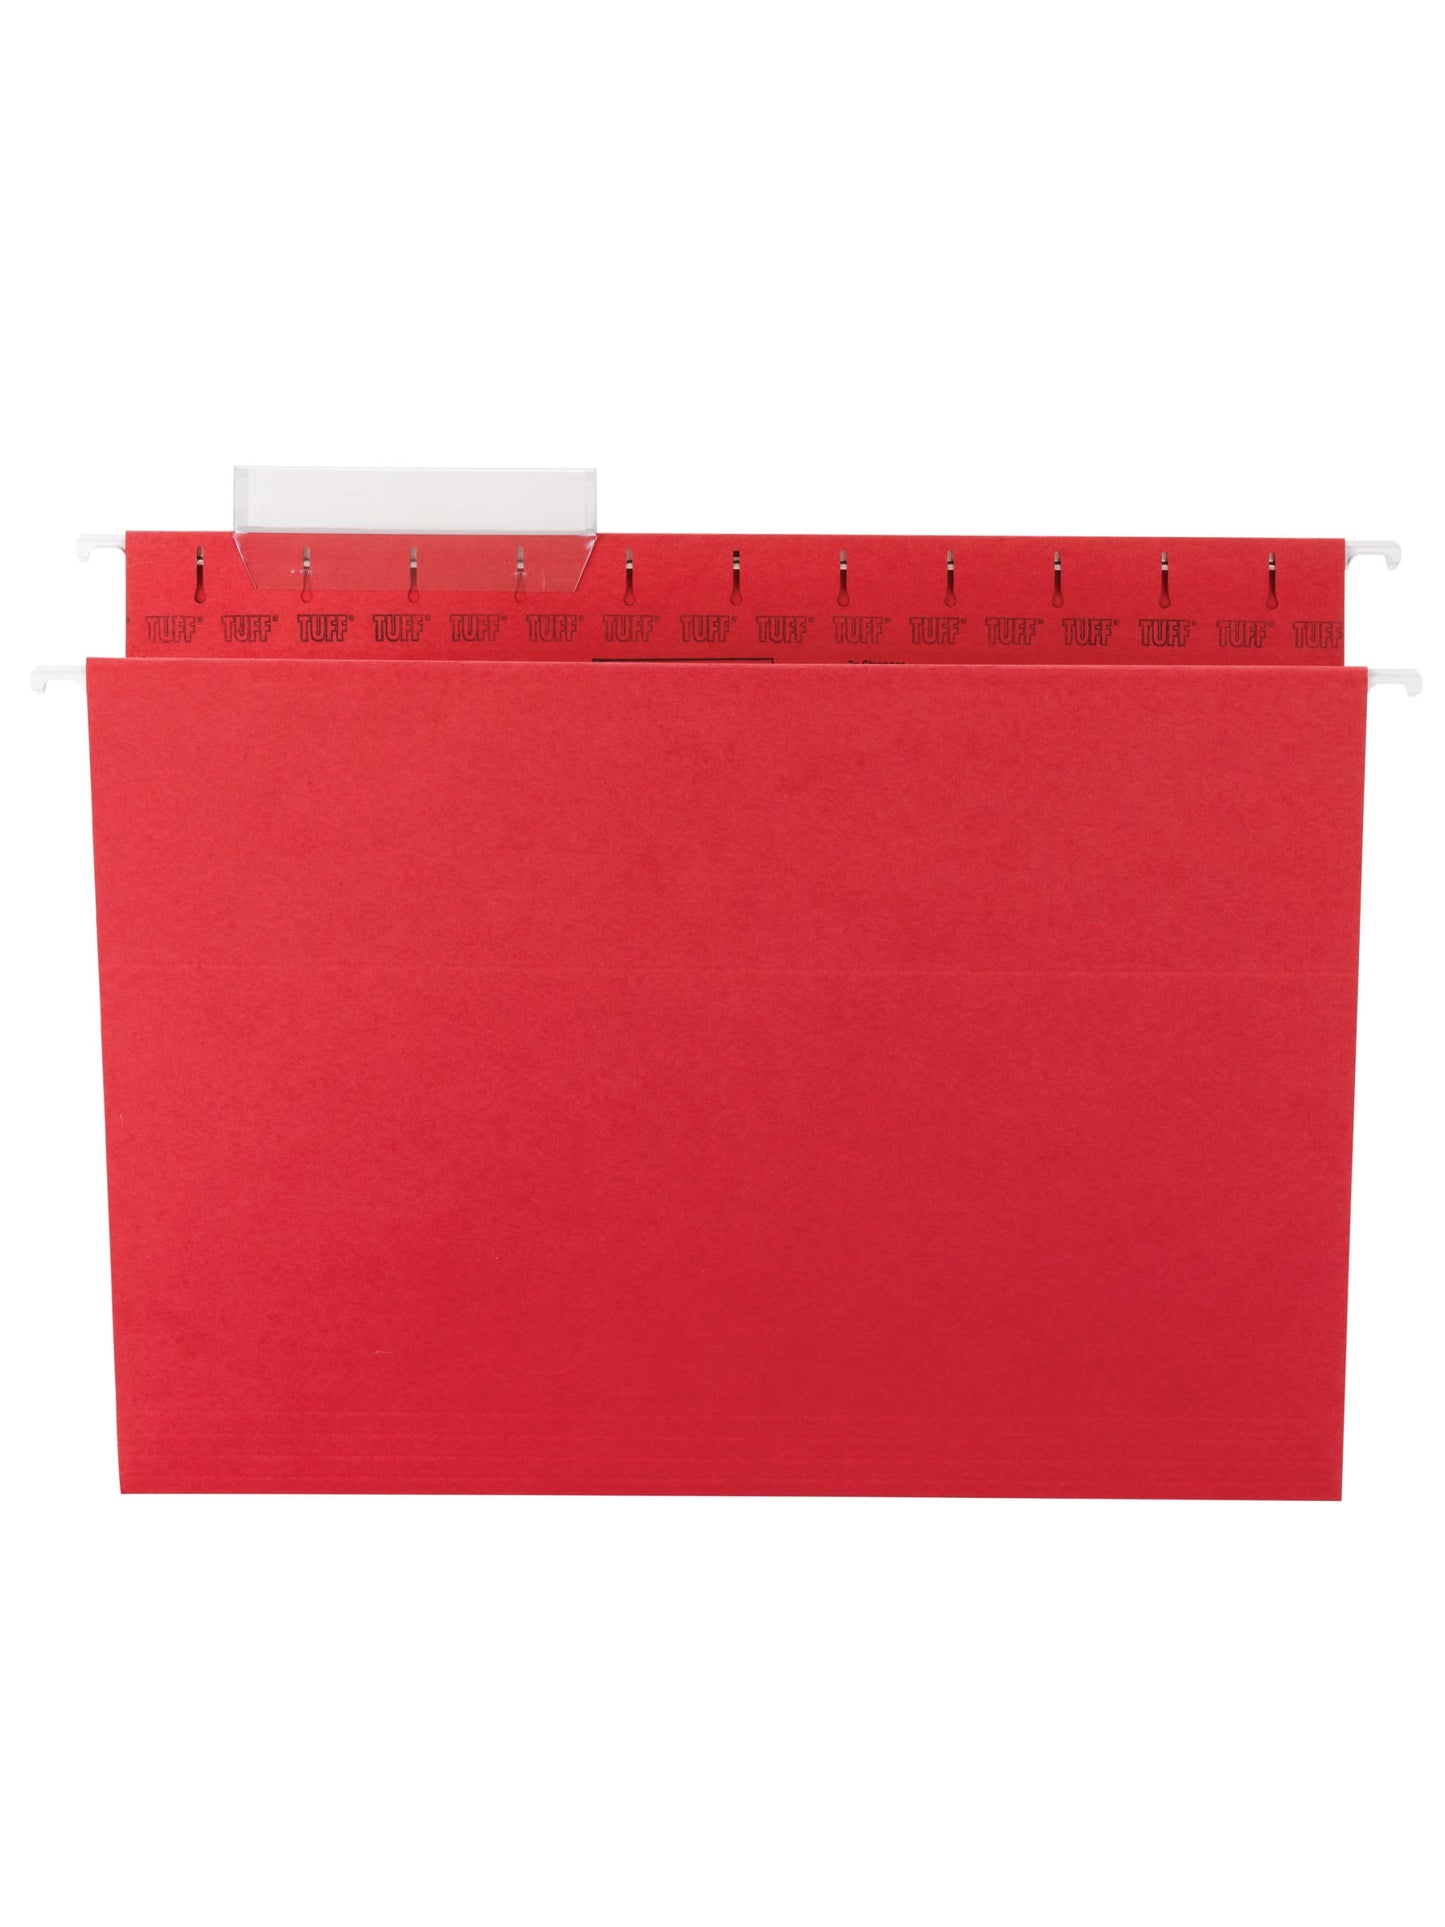 TUFF® Hanging File Folders with Easy Slide® Tabs, Red Color, Letter Size, Set of 18, 086486640435